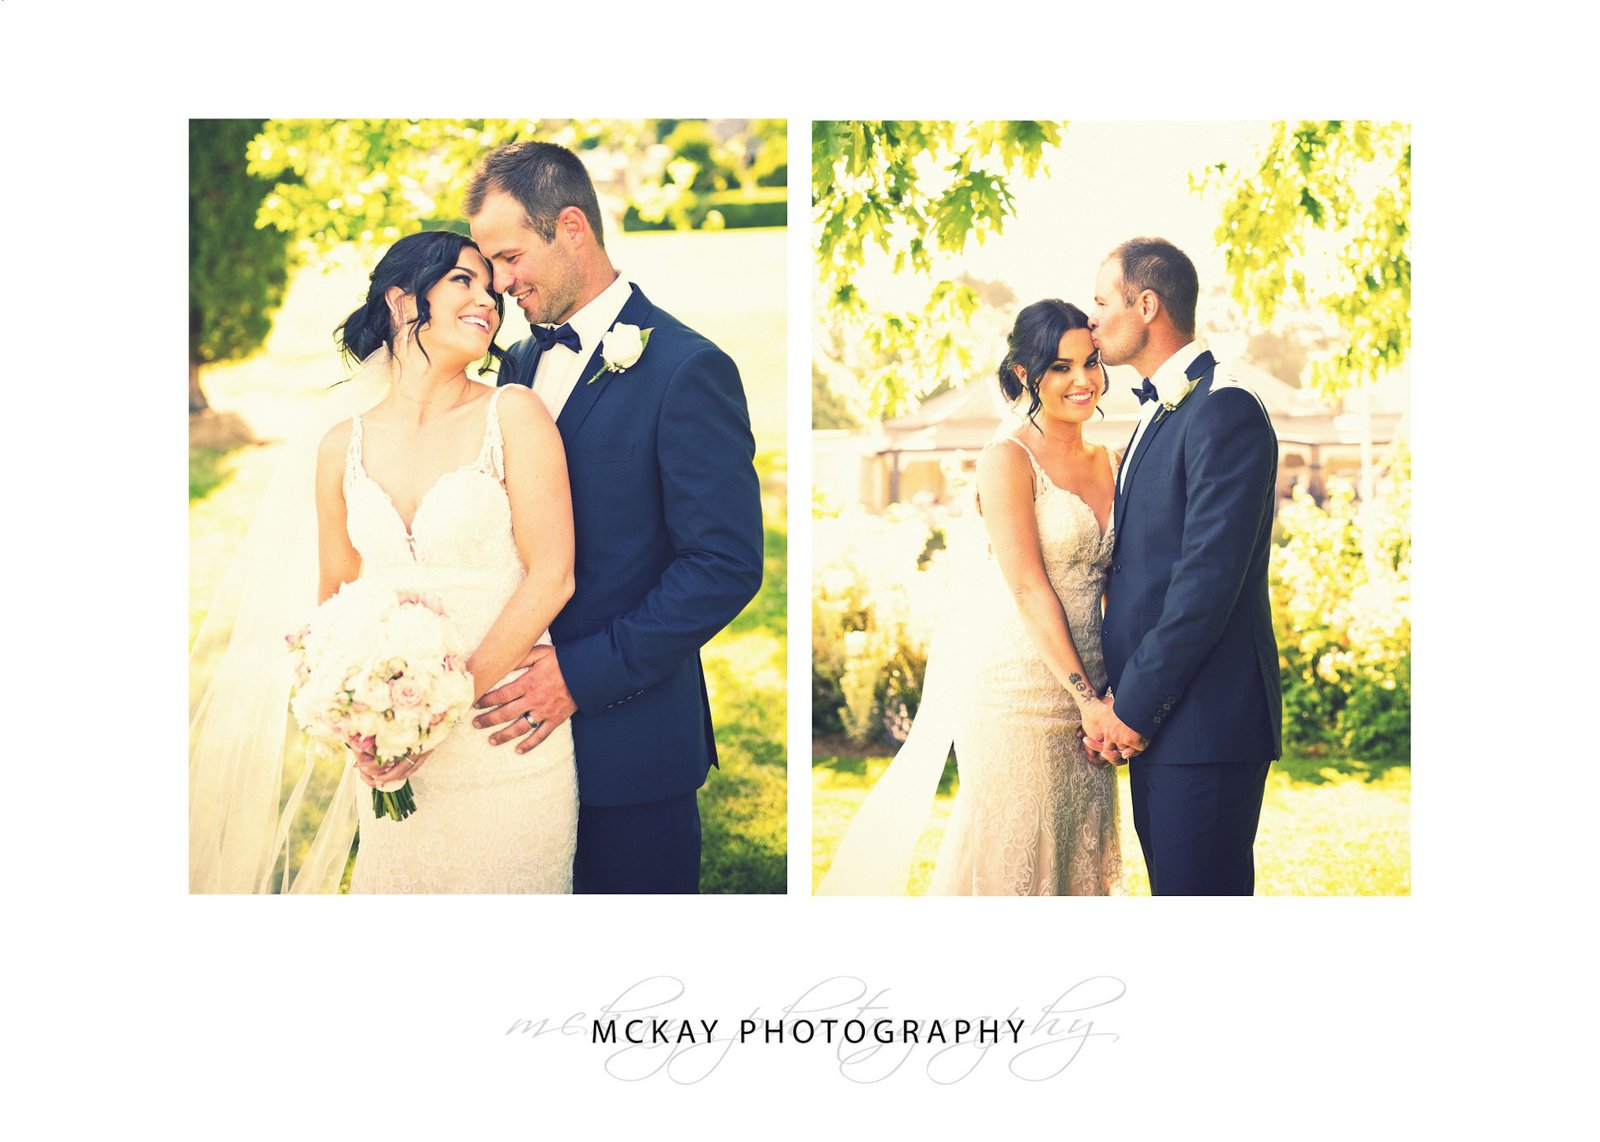 Light and colourful wedding photo at peppers Craigieburn